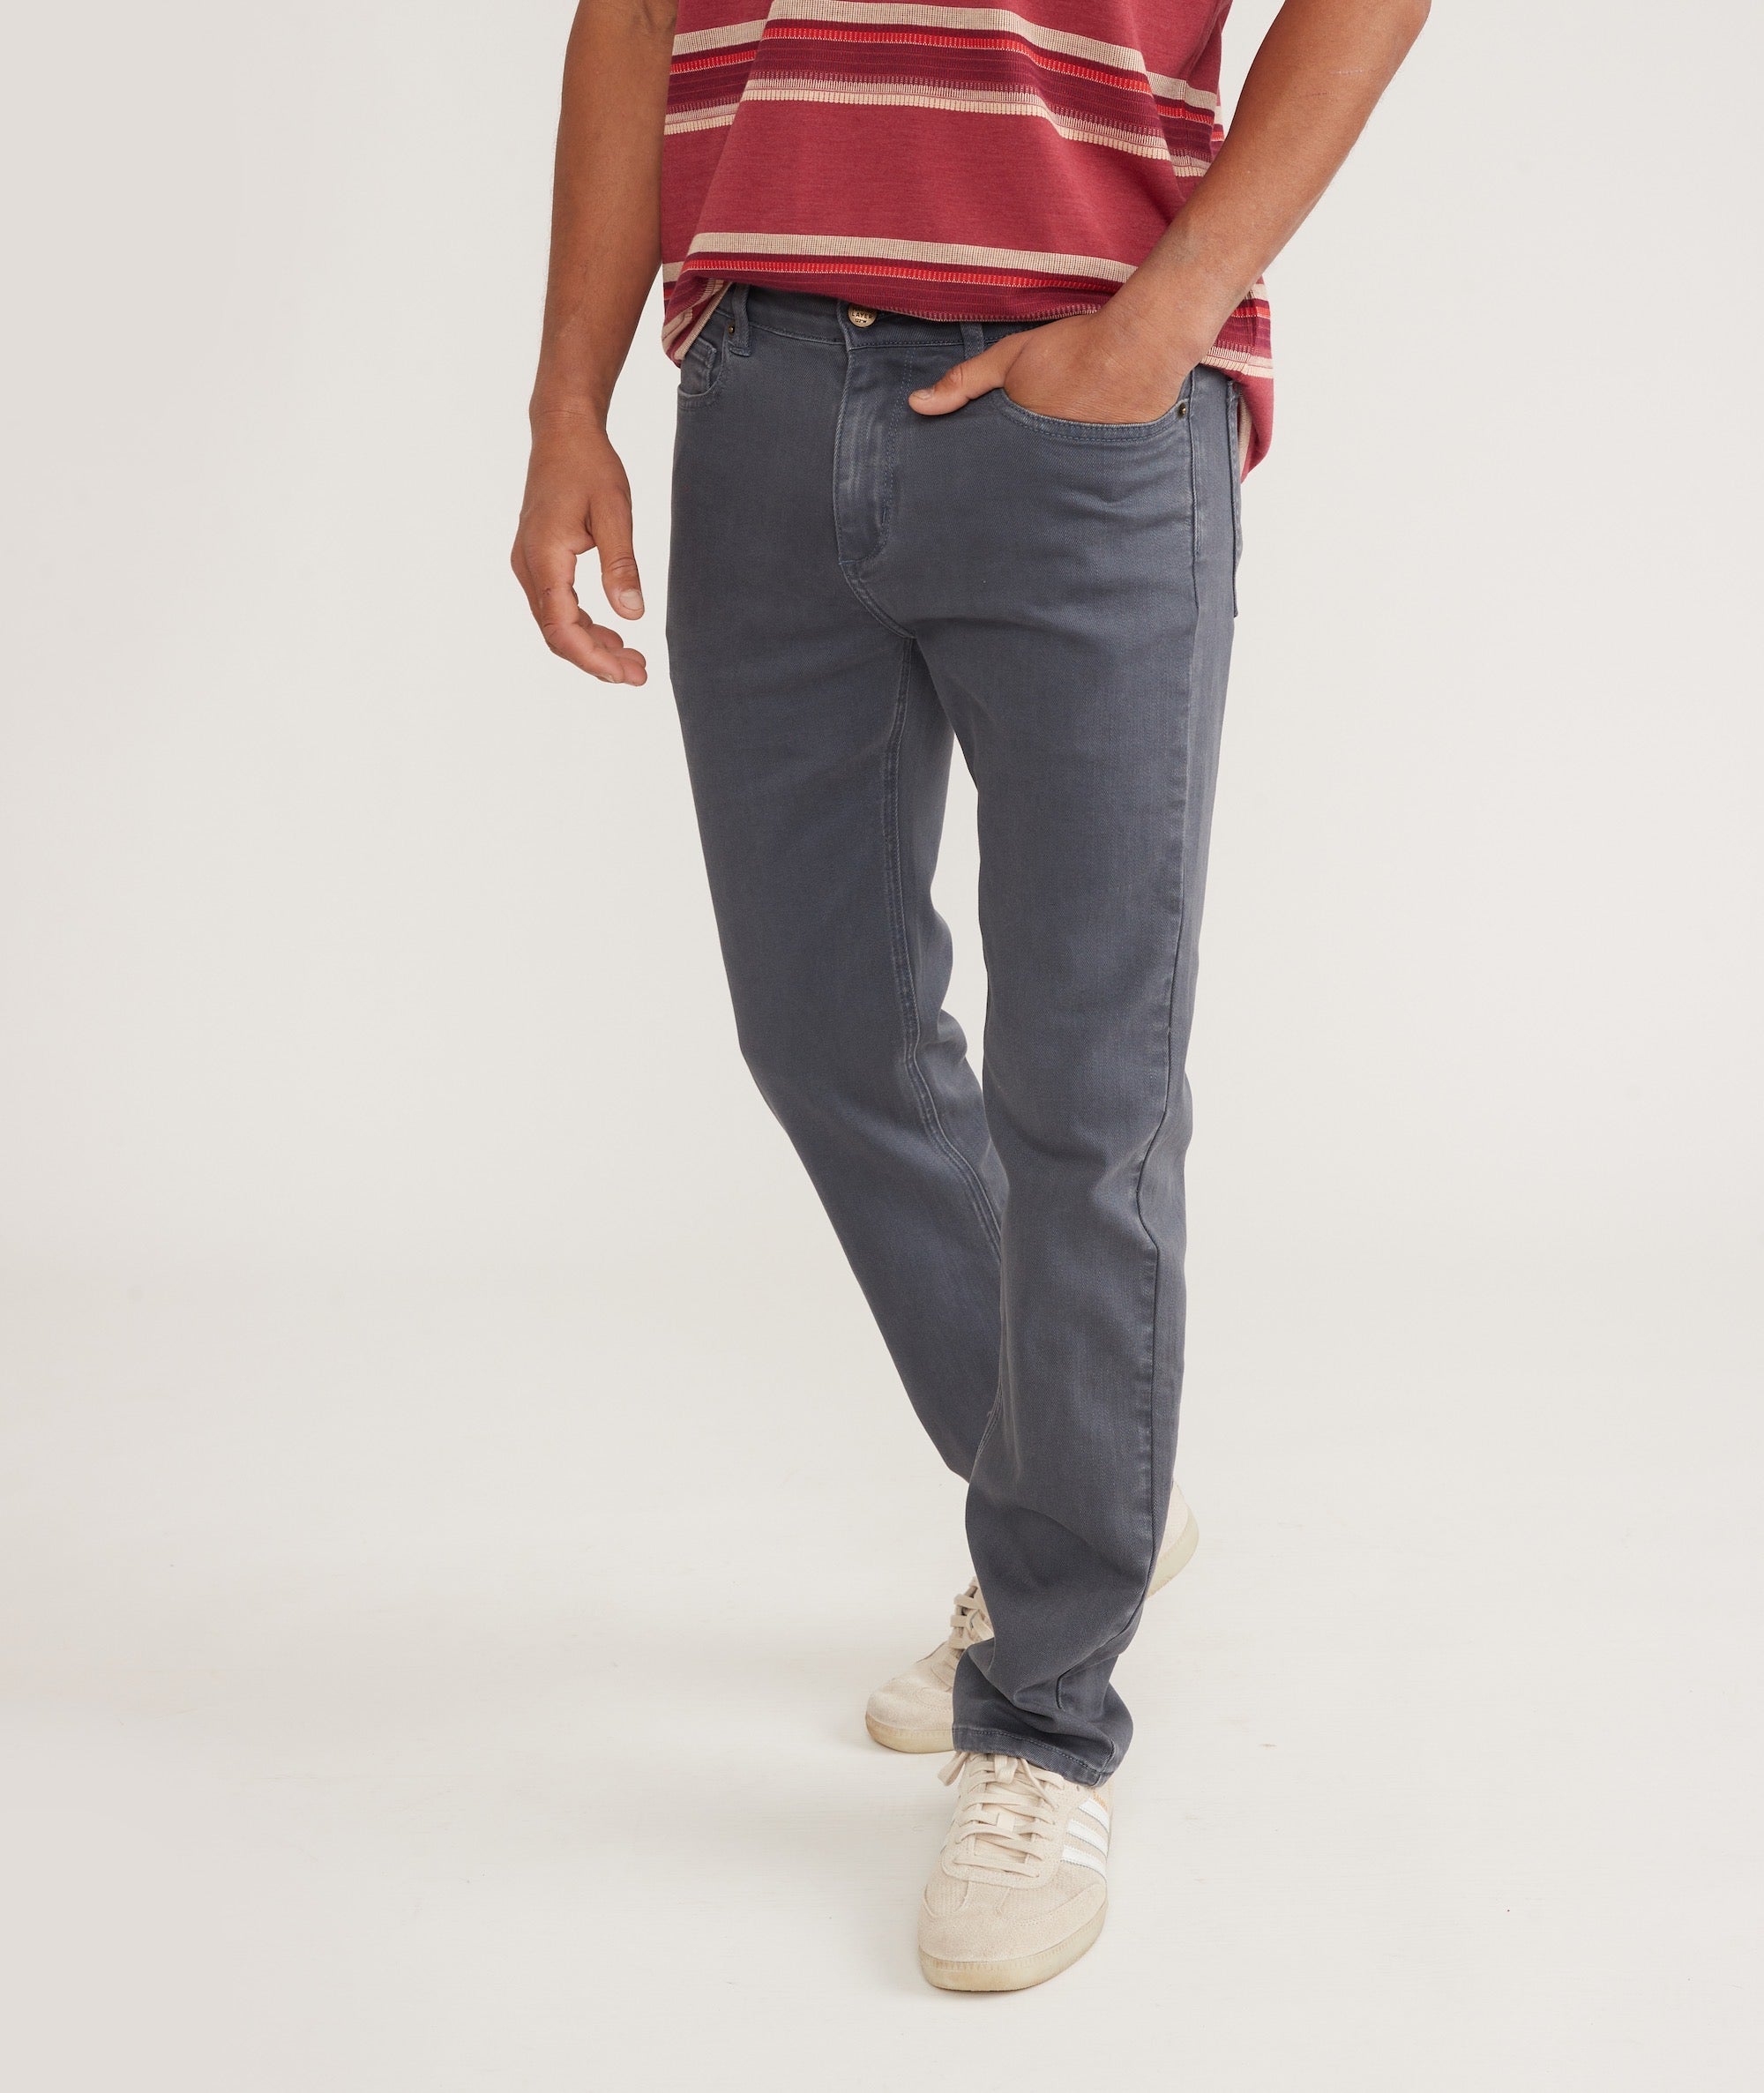 Marine Layer Athletic Fit Five Pocket Stretch Twill Pants